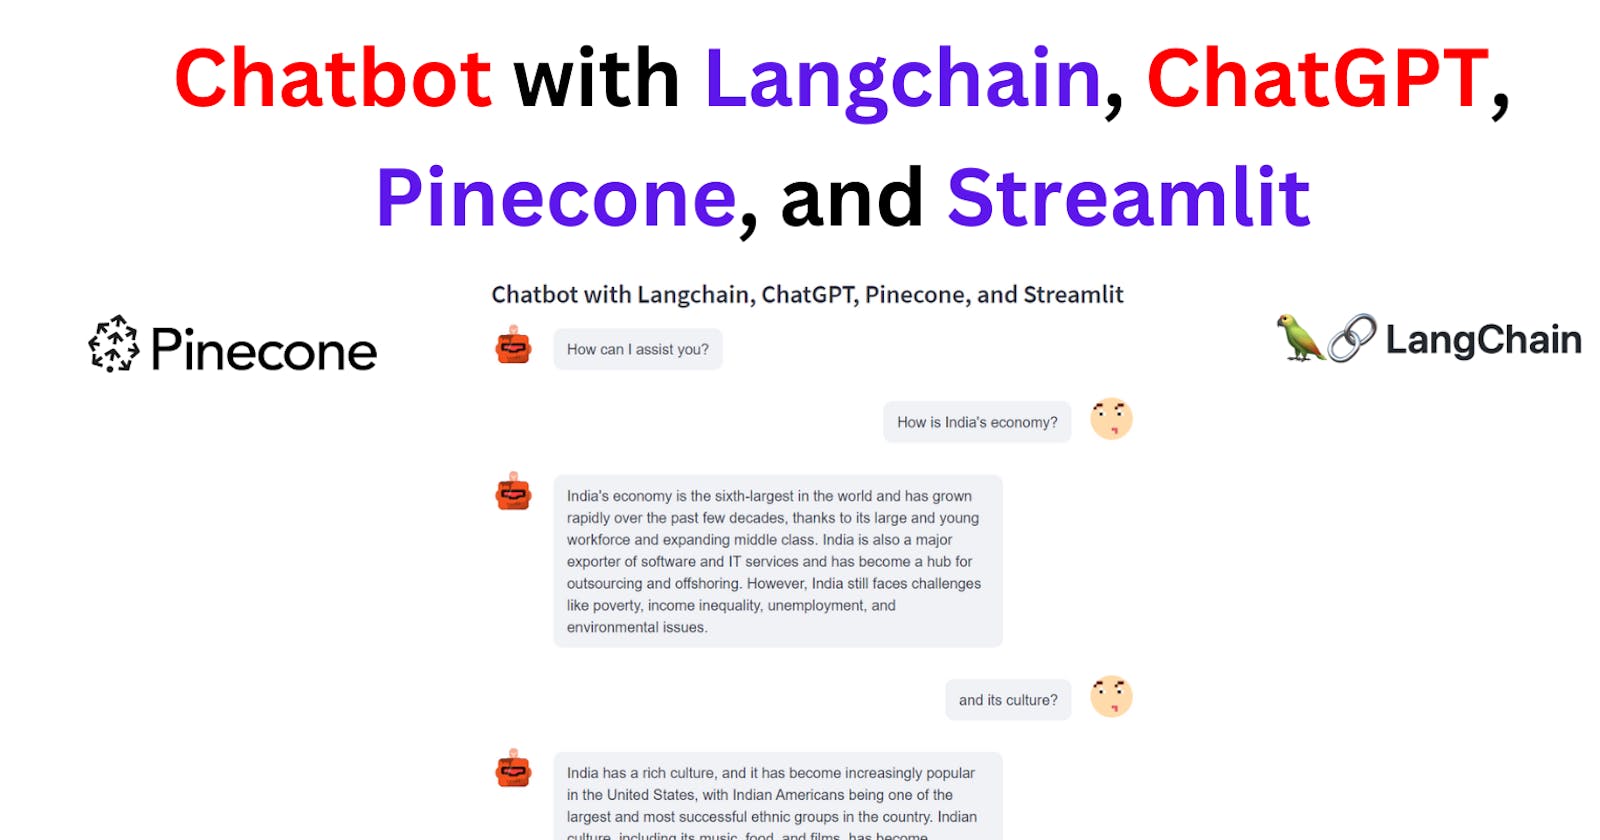 Building an Interactive Chatbot with Langchain, ChatGPT, Pinecone, and Streamlit